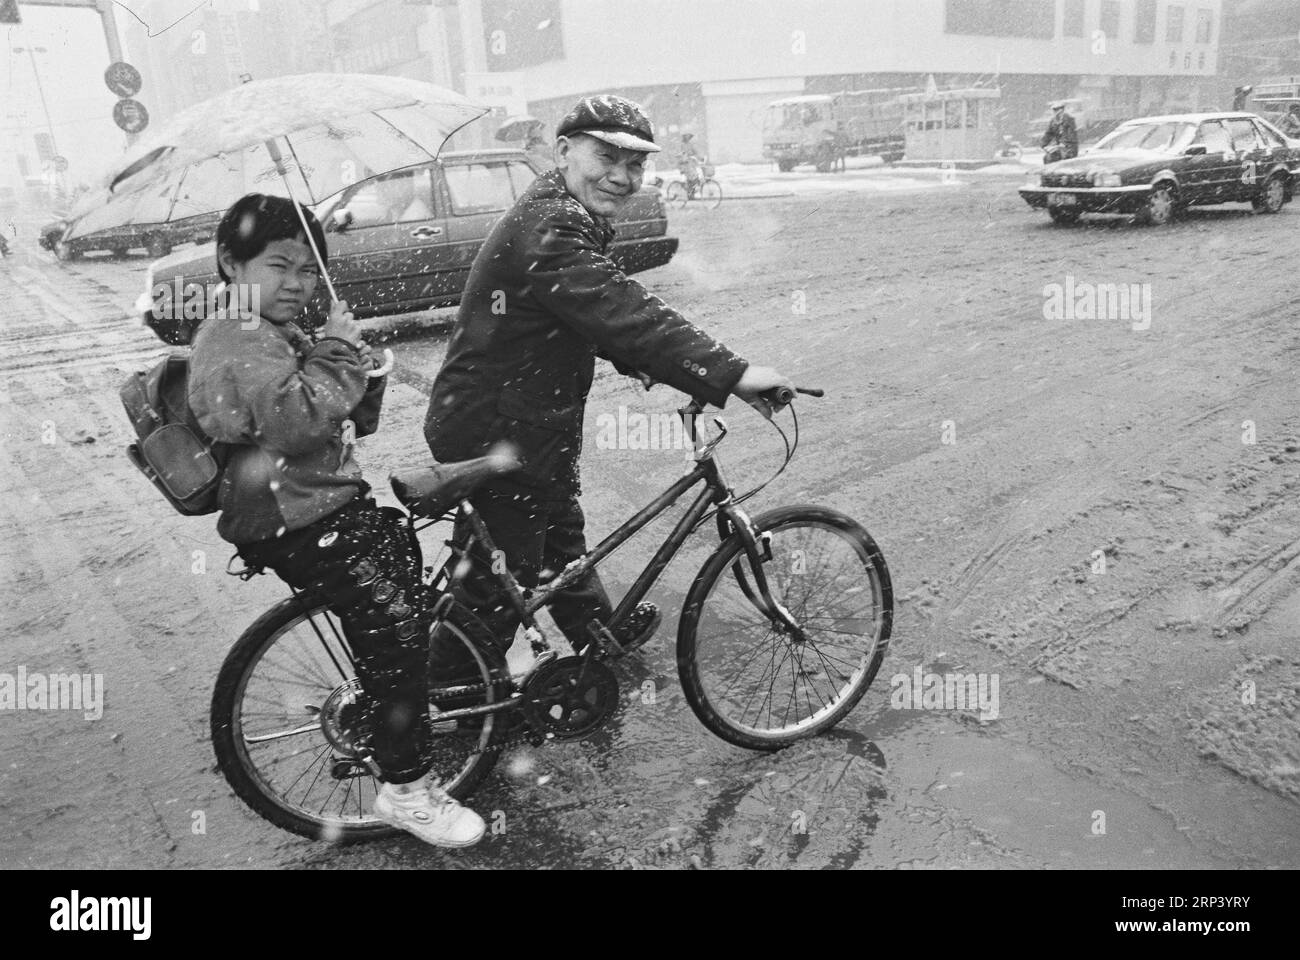 (181020) -- BEIJING, Oct. 20, 2018 () -- File photo taken in 1994 shows a man carrying a child to school by bike in the snow in Qiqihar, northeast China s Heilongjiang Province. If you came to Beijing, capital of China, 40 years ago, you were probably struck by the sea of bicycles on streets, a unique phenomenon earning China the title kingdom of bicycles . At that time, ordinary Chinese could not afford cars and few people could travel by air, let alone frequent long-distance travelling. Trains, the most commonly means of transportation then, were always jam-packed in the stuffy compartments. Stock Photo